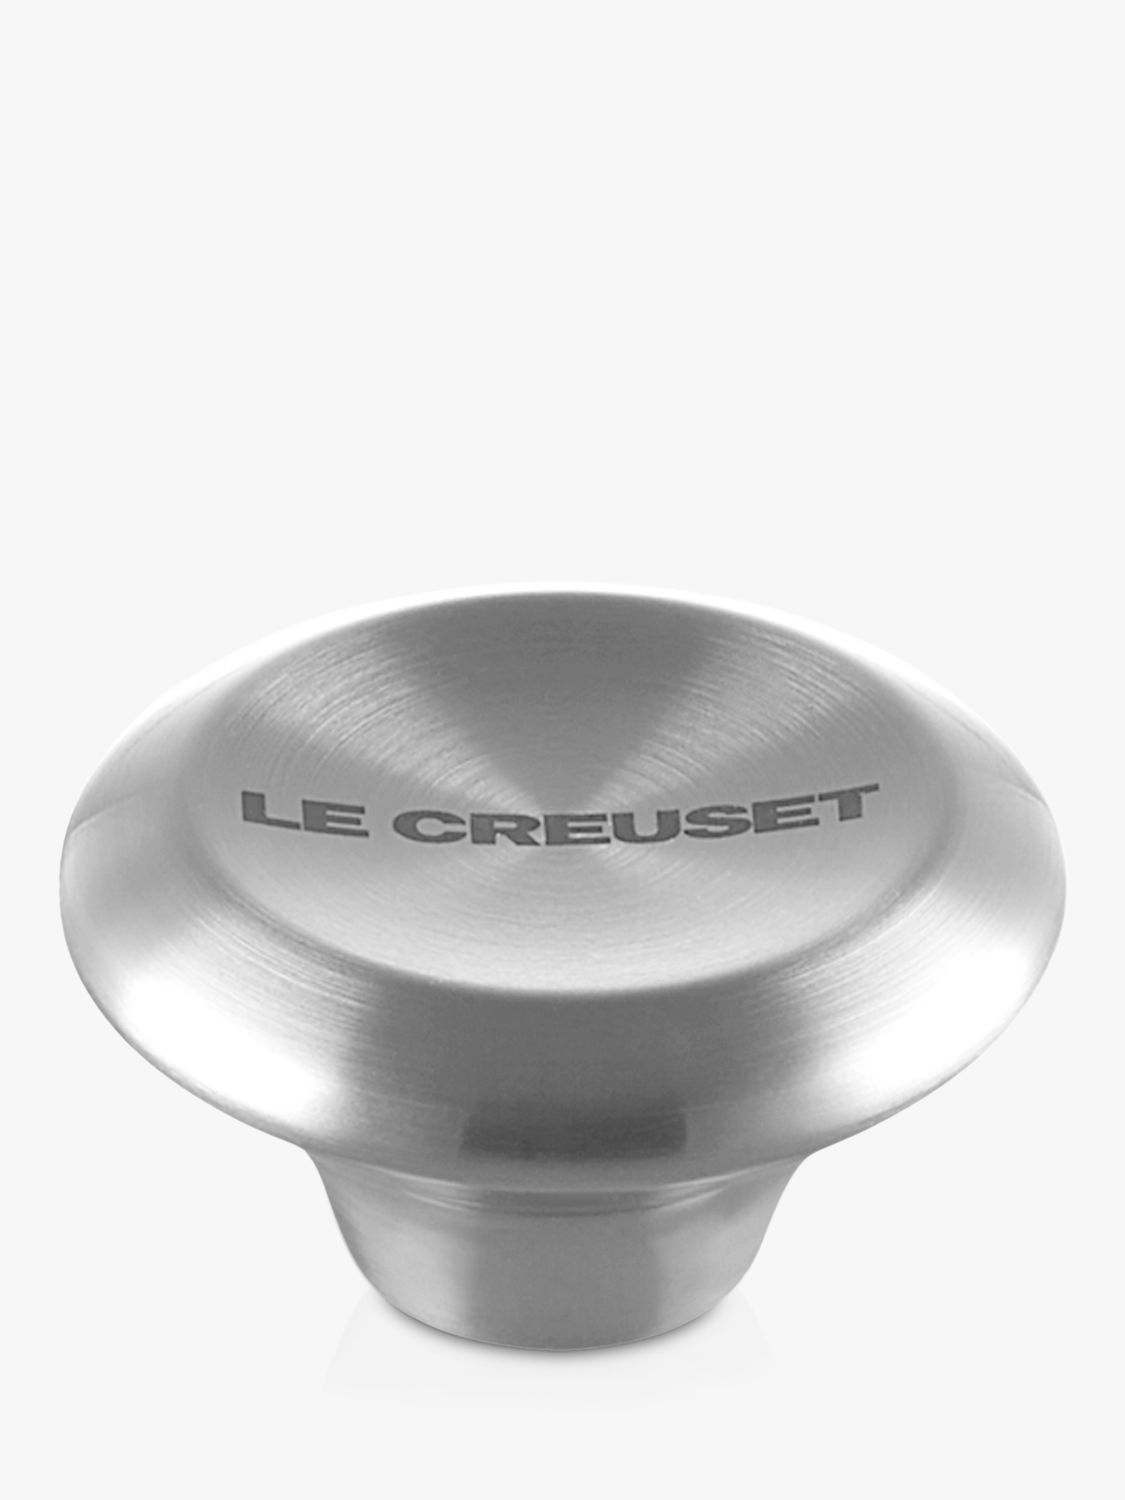 telex build Assimilate Le Creuset Signature Stainless Steel Knob, Silver, 47mm